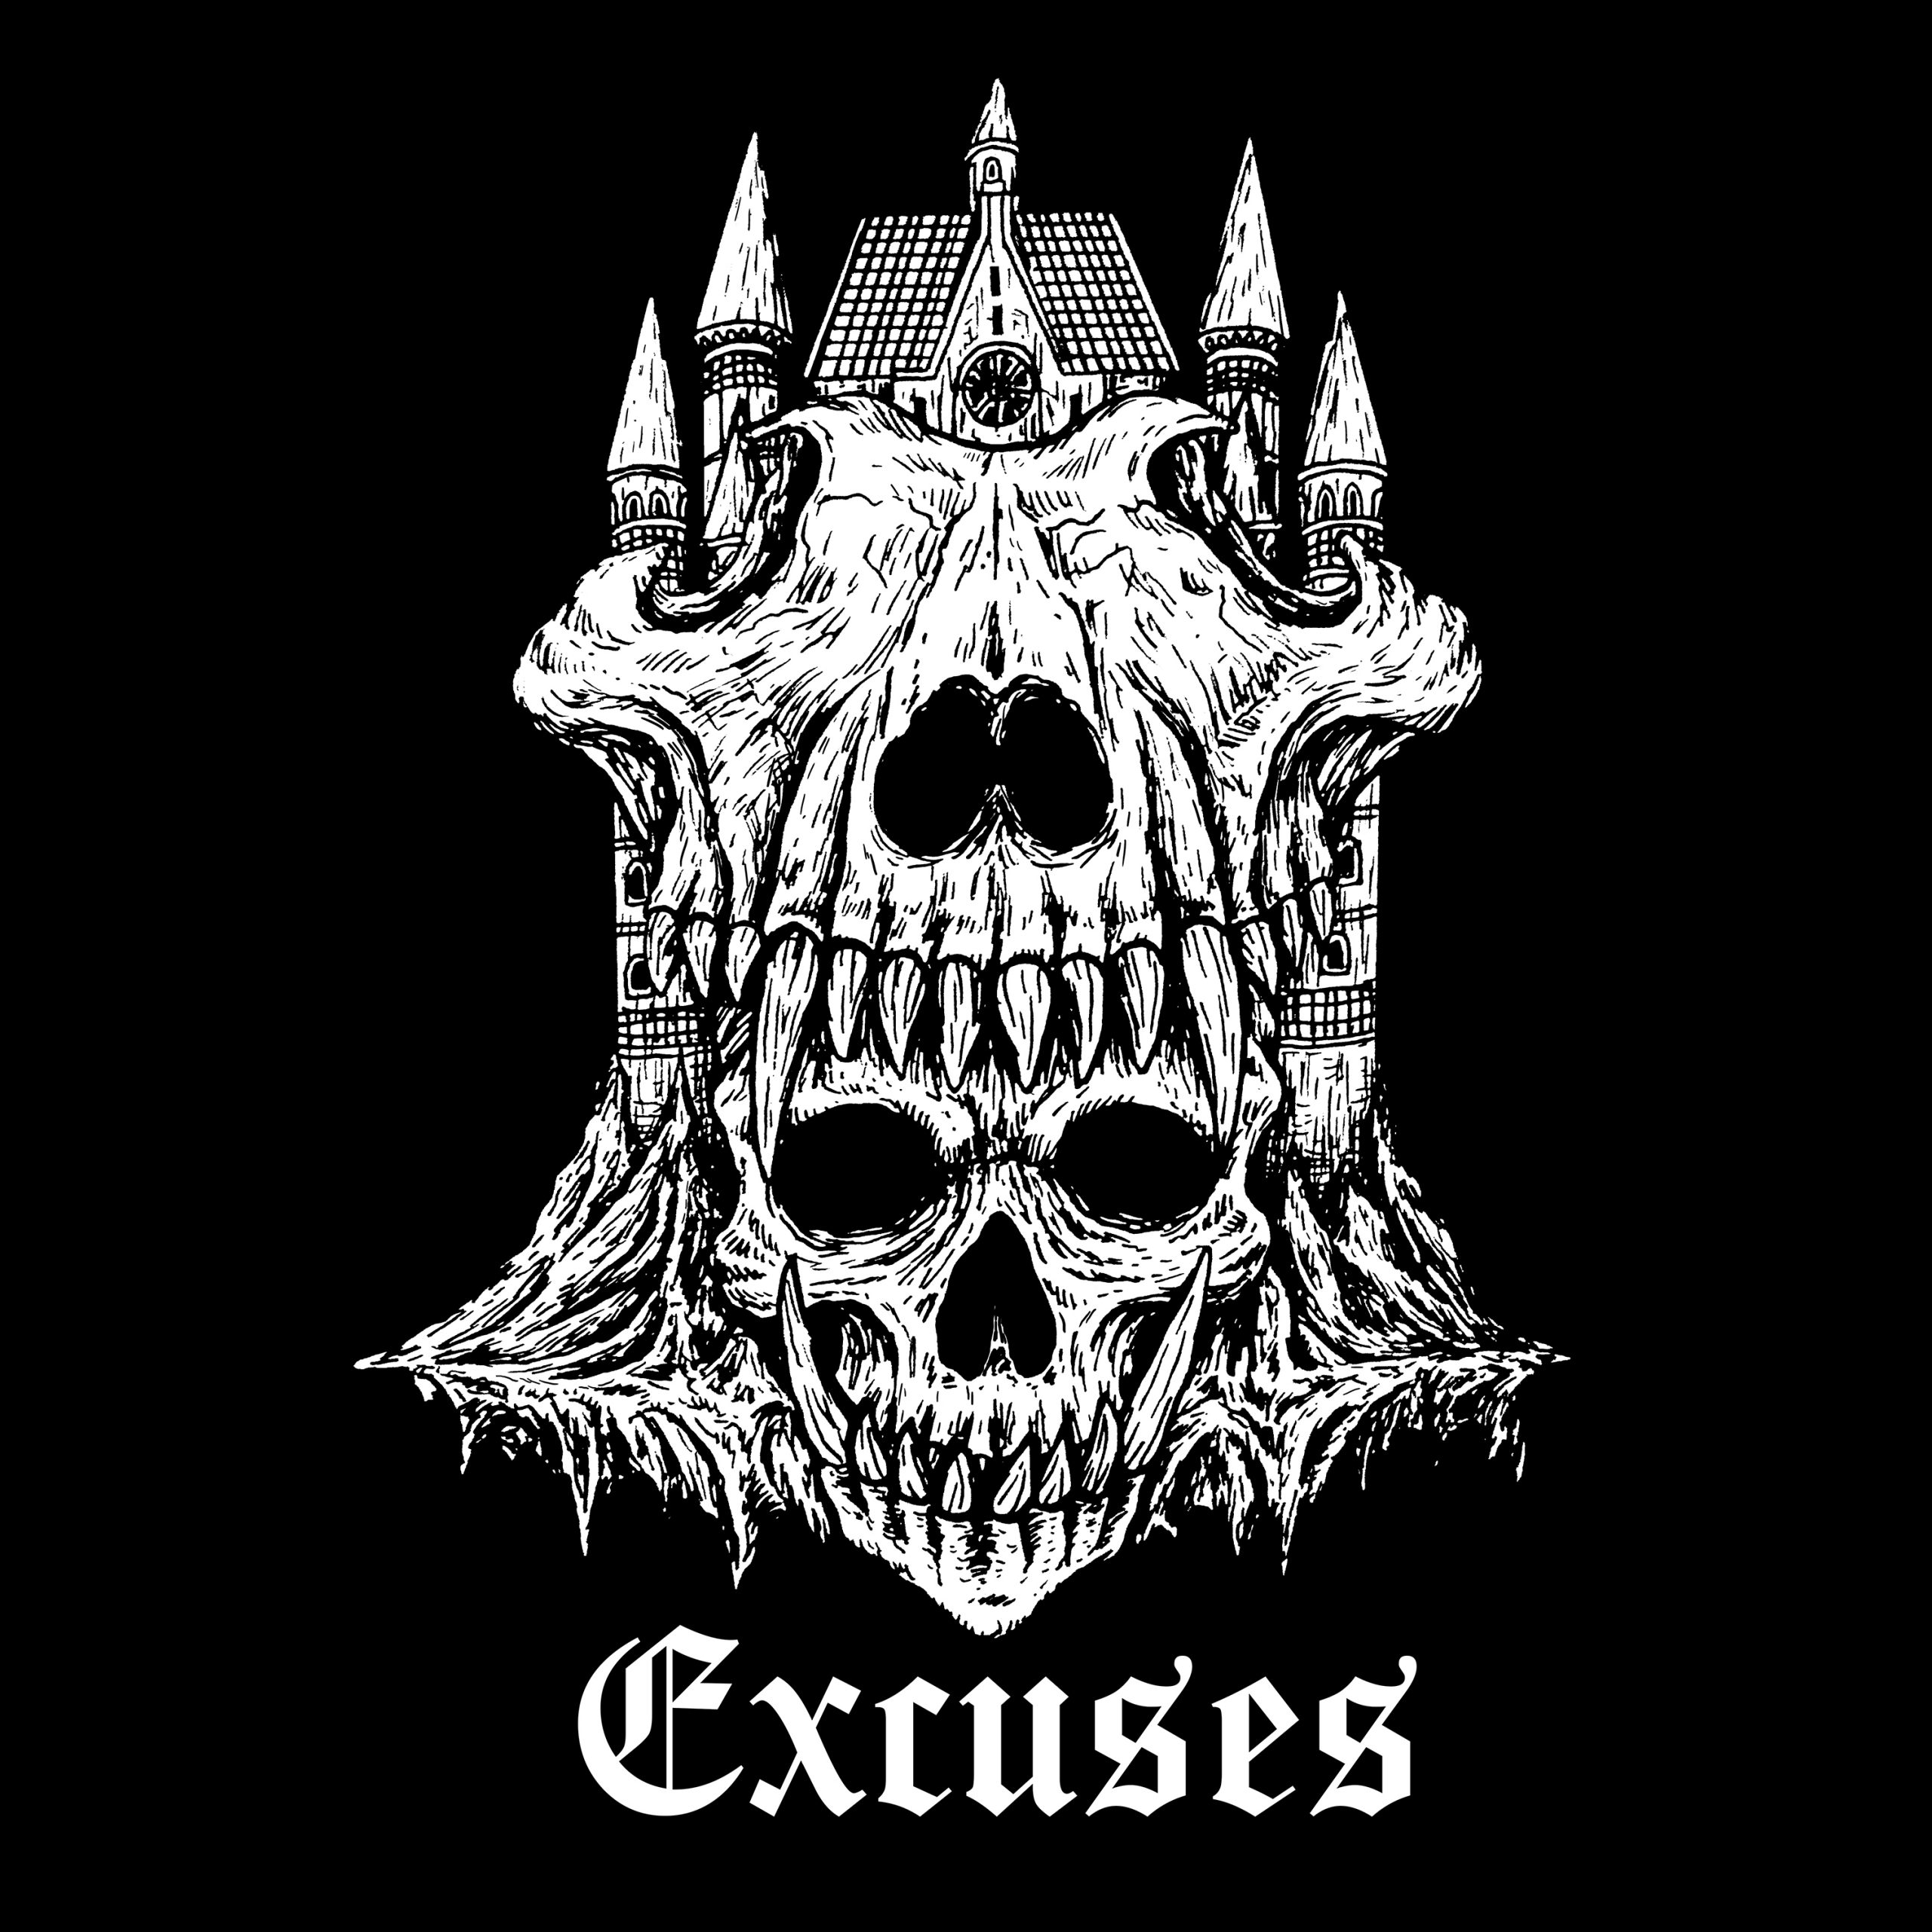 New Single: Excuses Live on Most Streaming Services